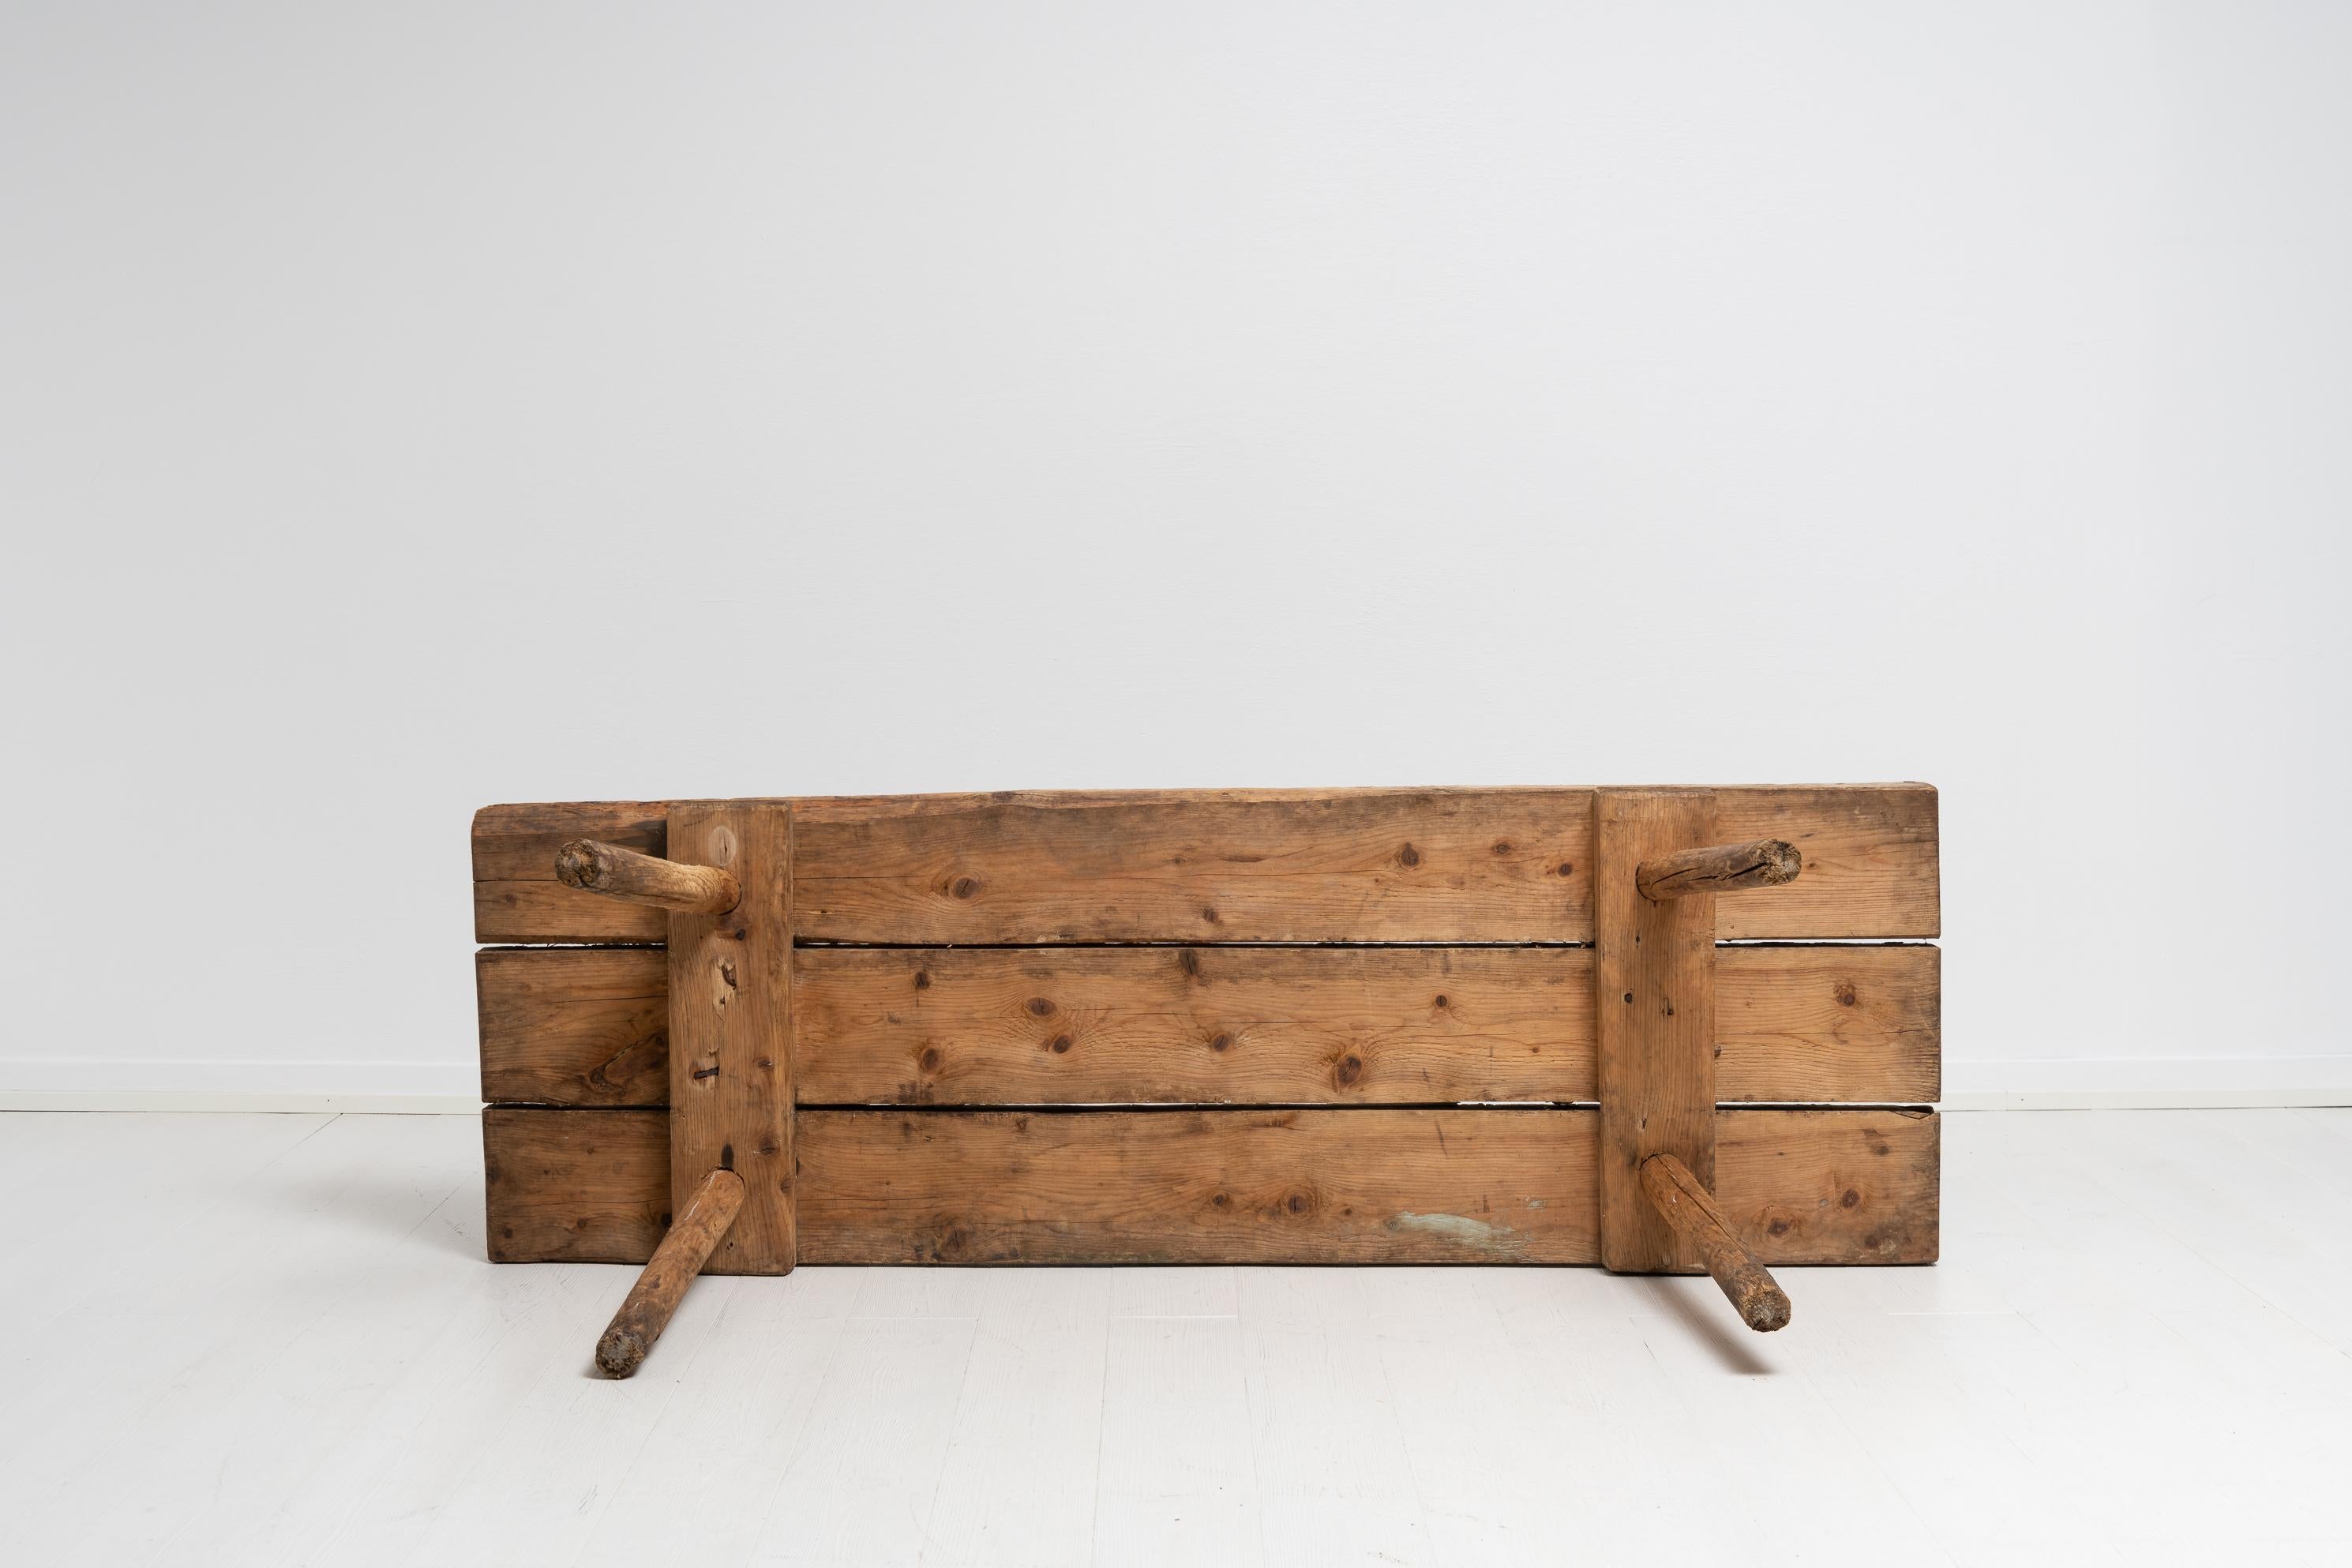 Early 19th Century Swedish Folk Art Rustic Work Bench Coffee Table For Sale 5